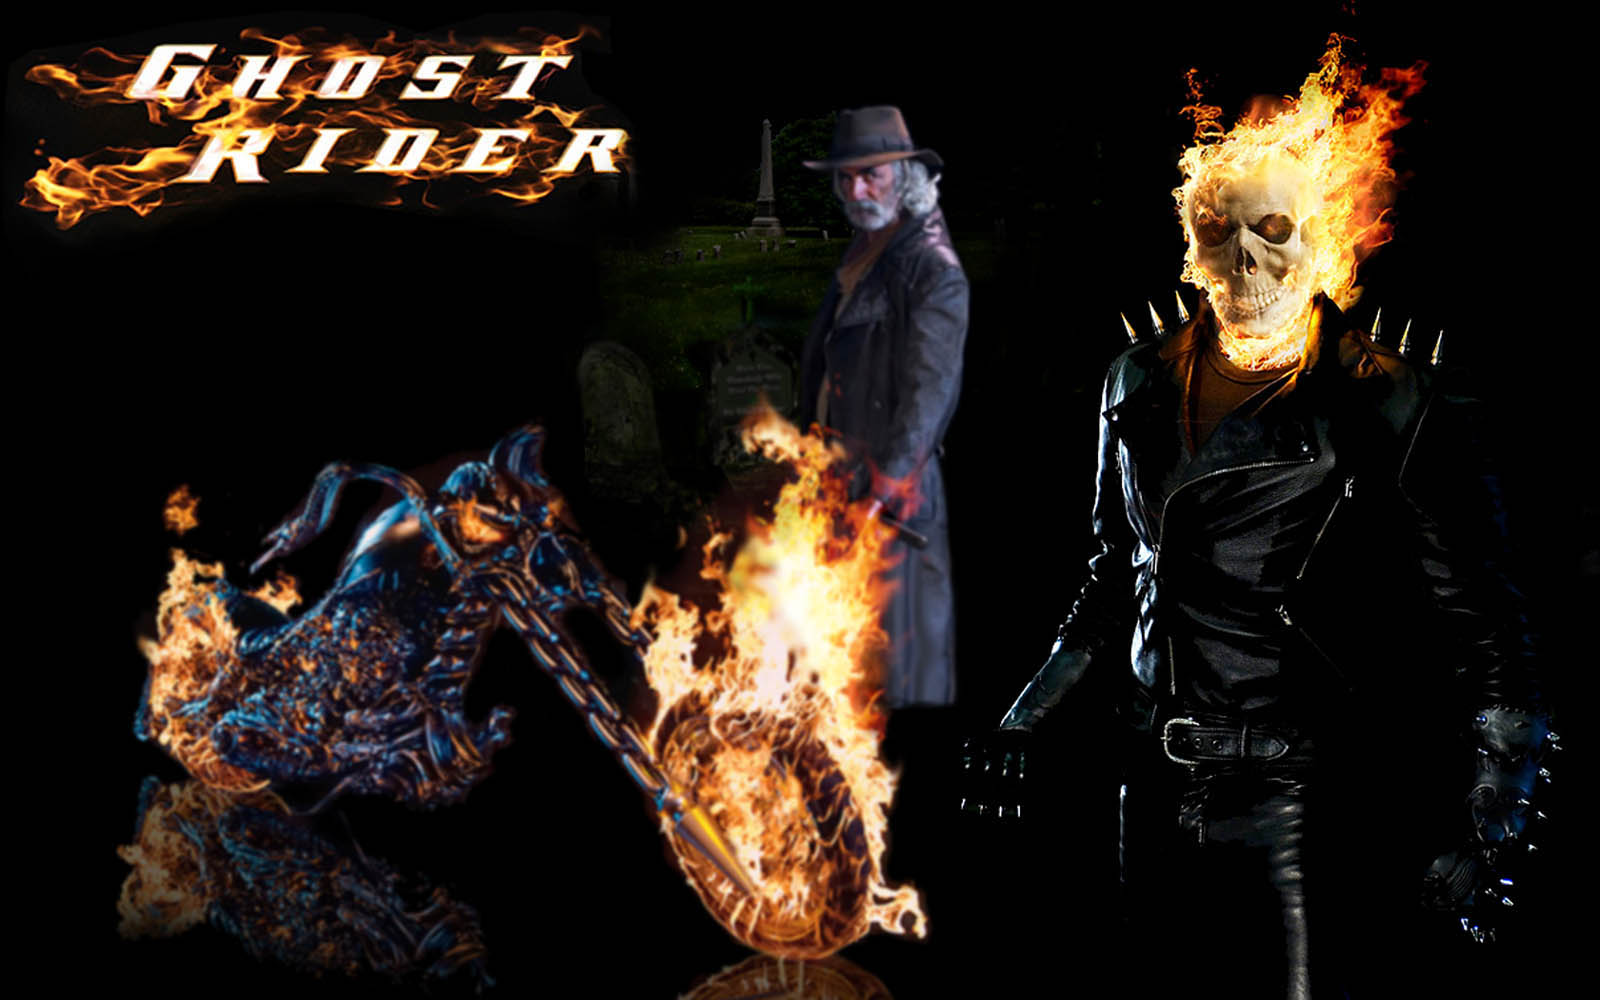 Tag Ghost Rider Wallpaper Image Paos Pictures And Background